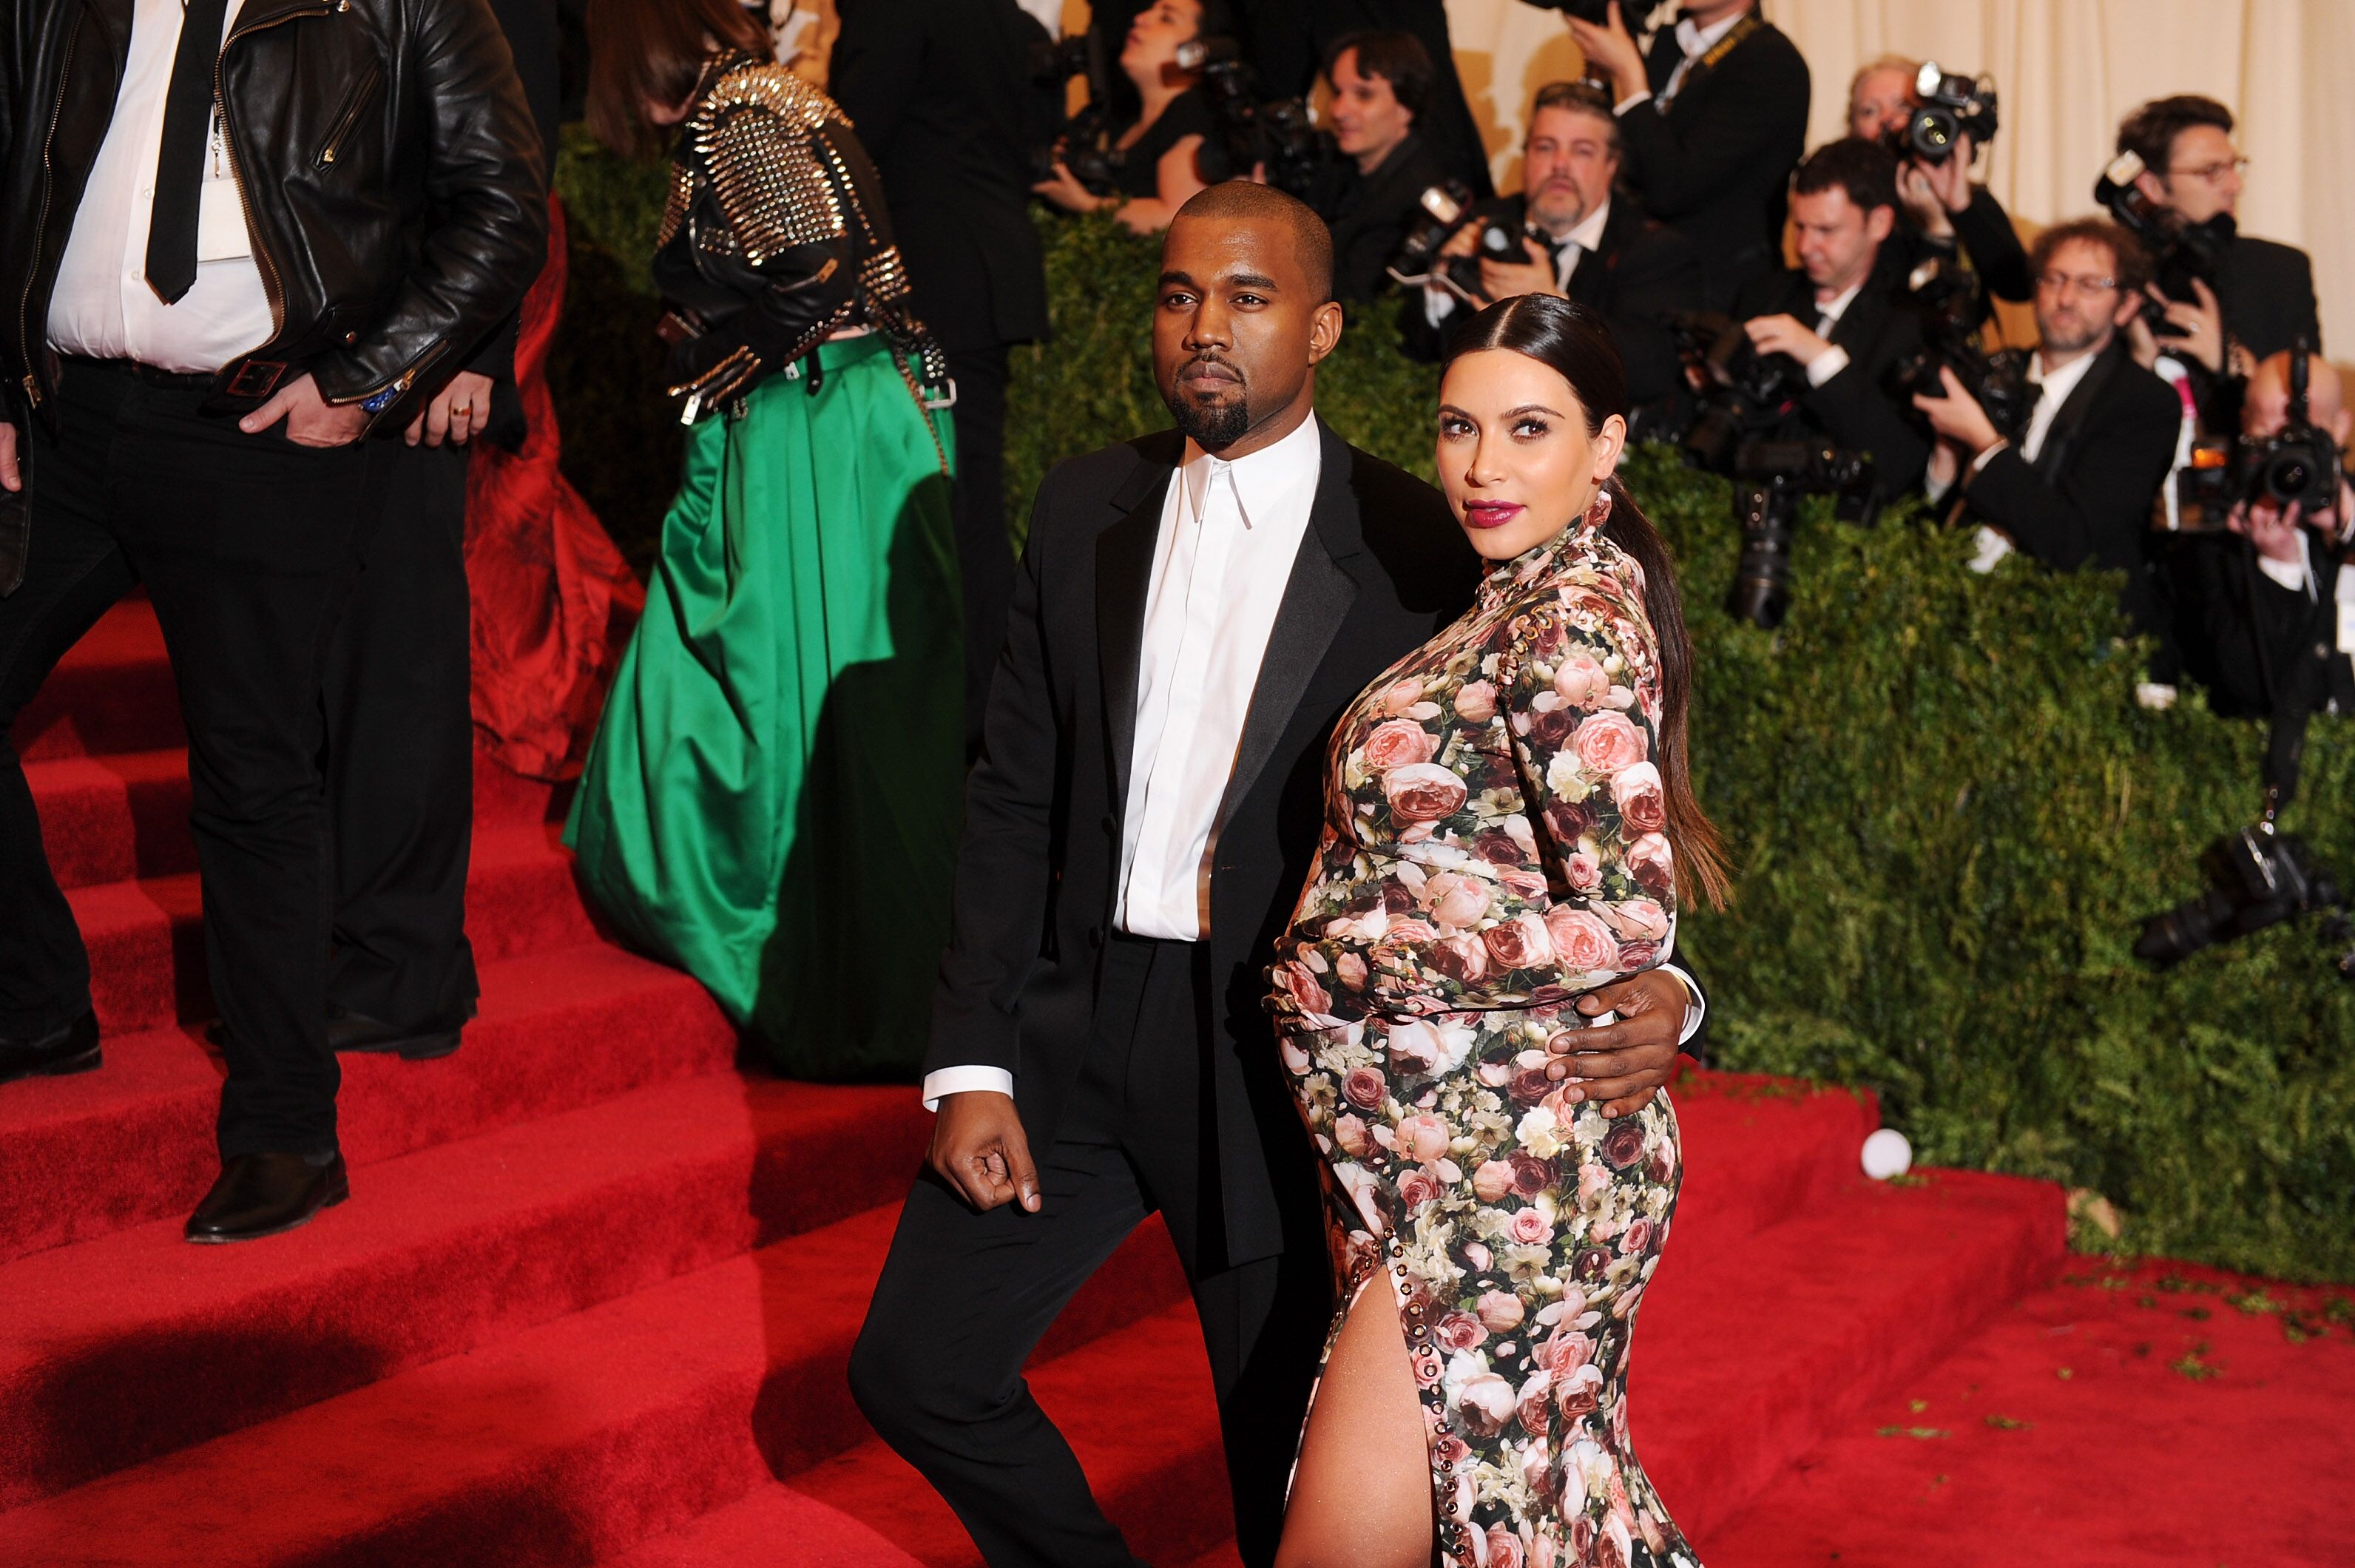 KAnye West and Kim Kardashian West at the 2013 MET Gala in New York | Source: Getty Images